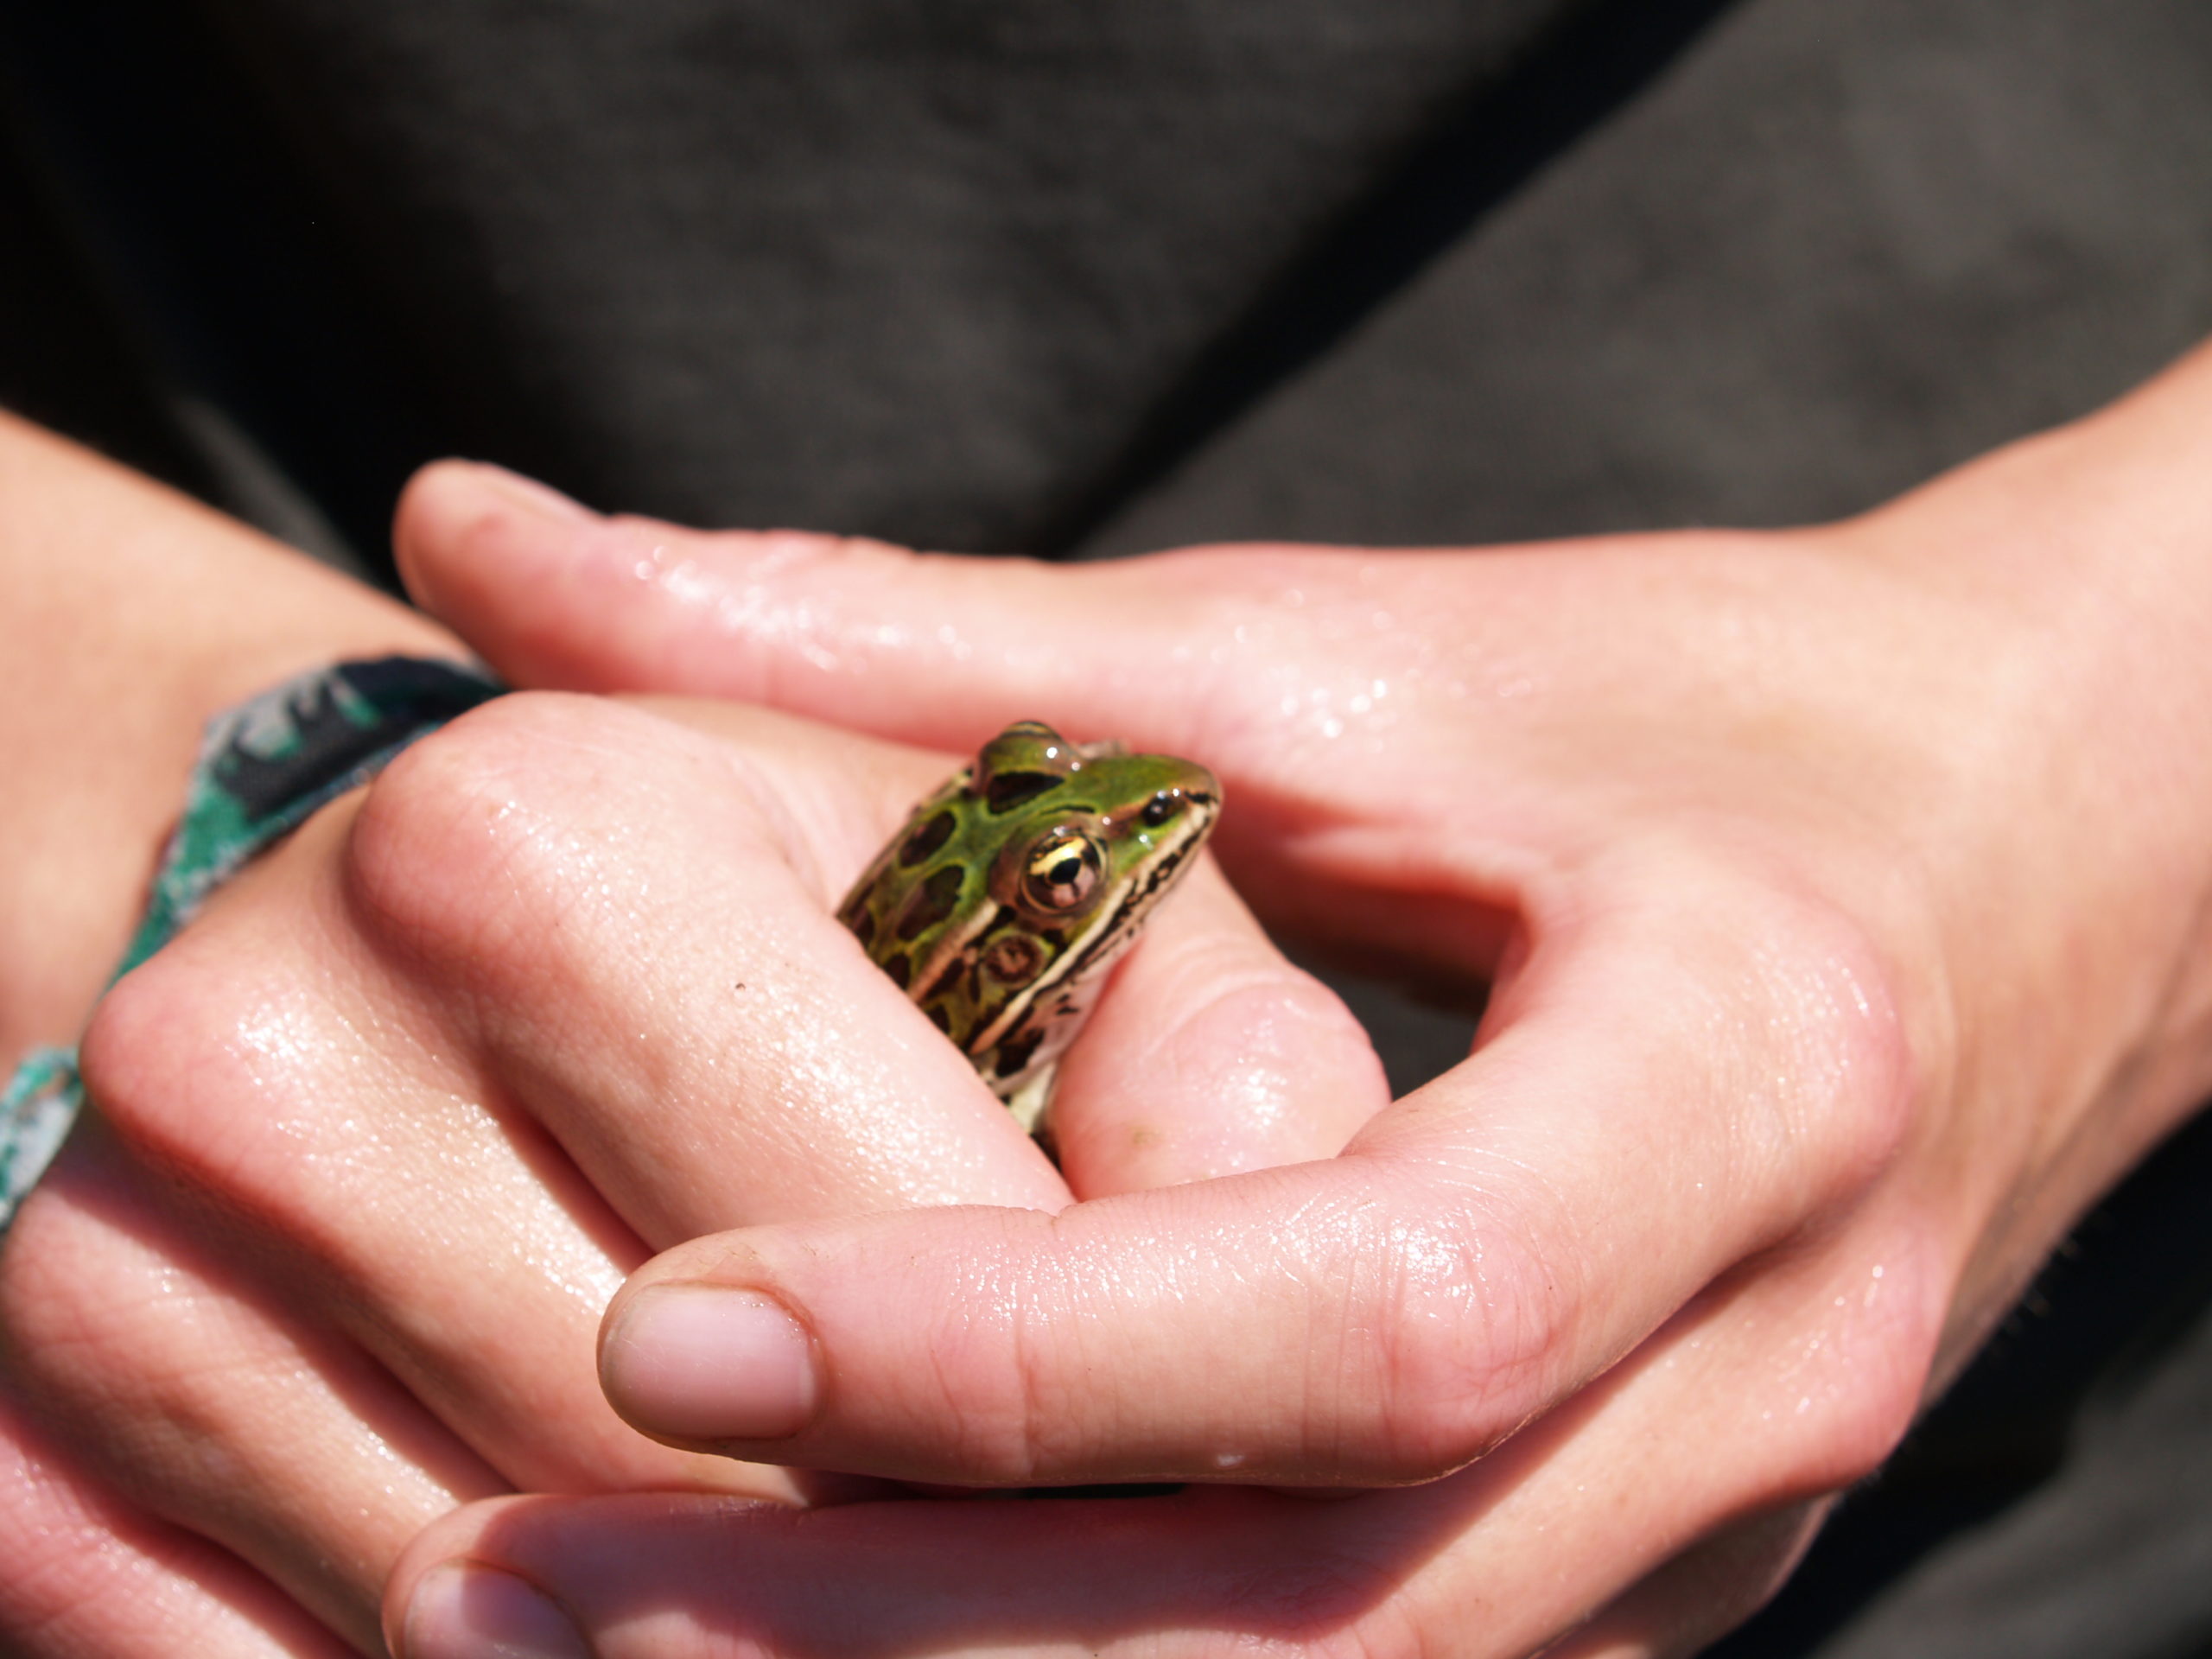 a zoomed in image of two hands holding onto a small frog